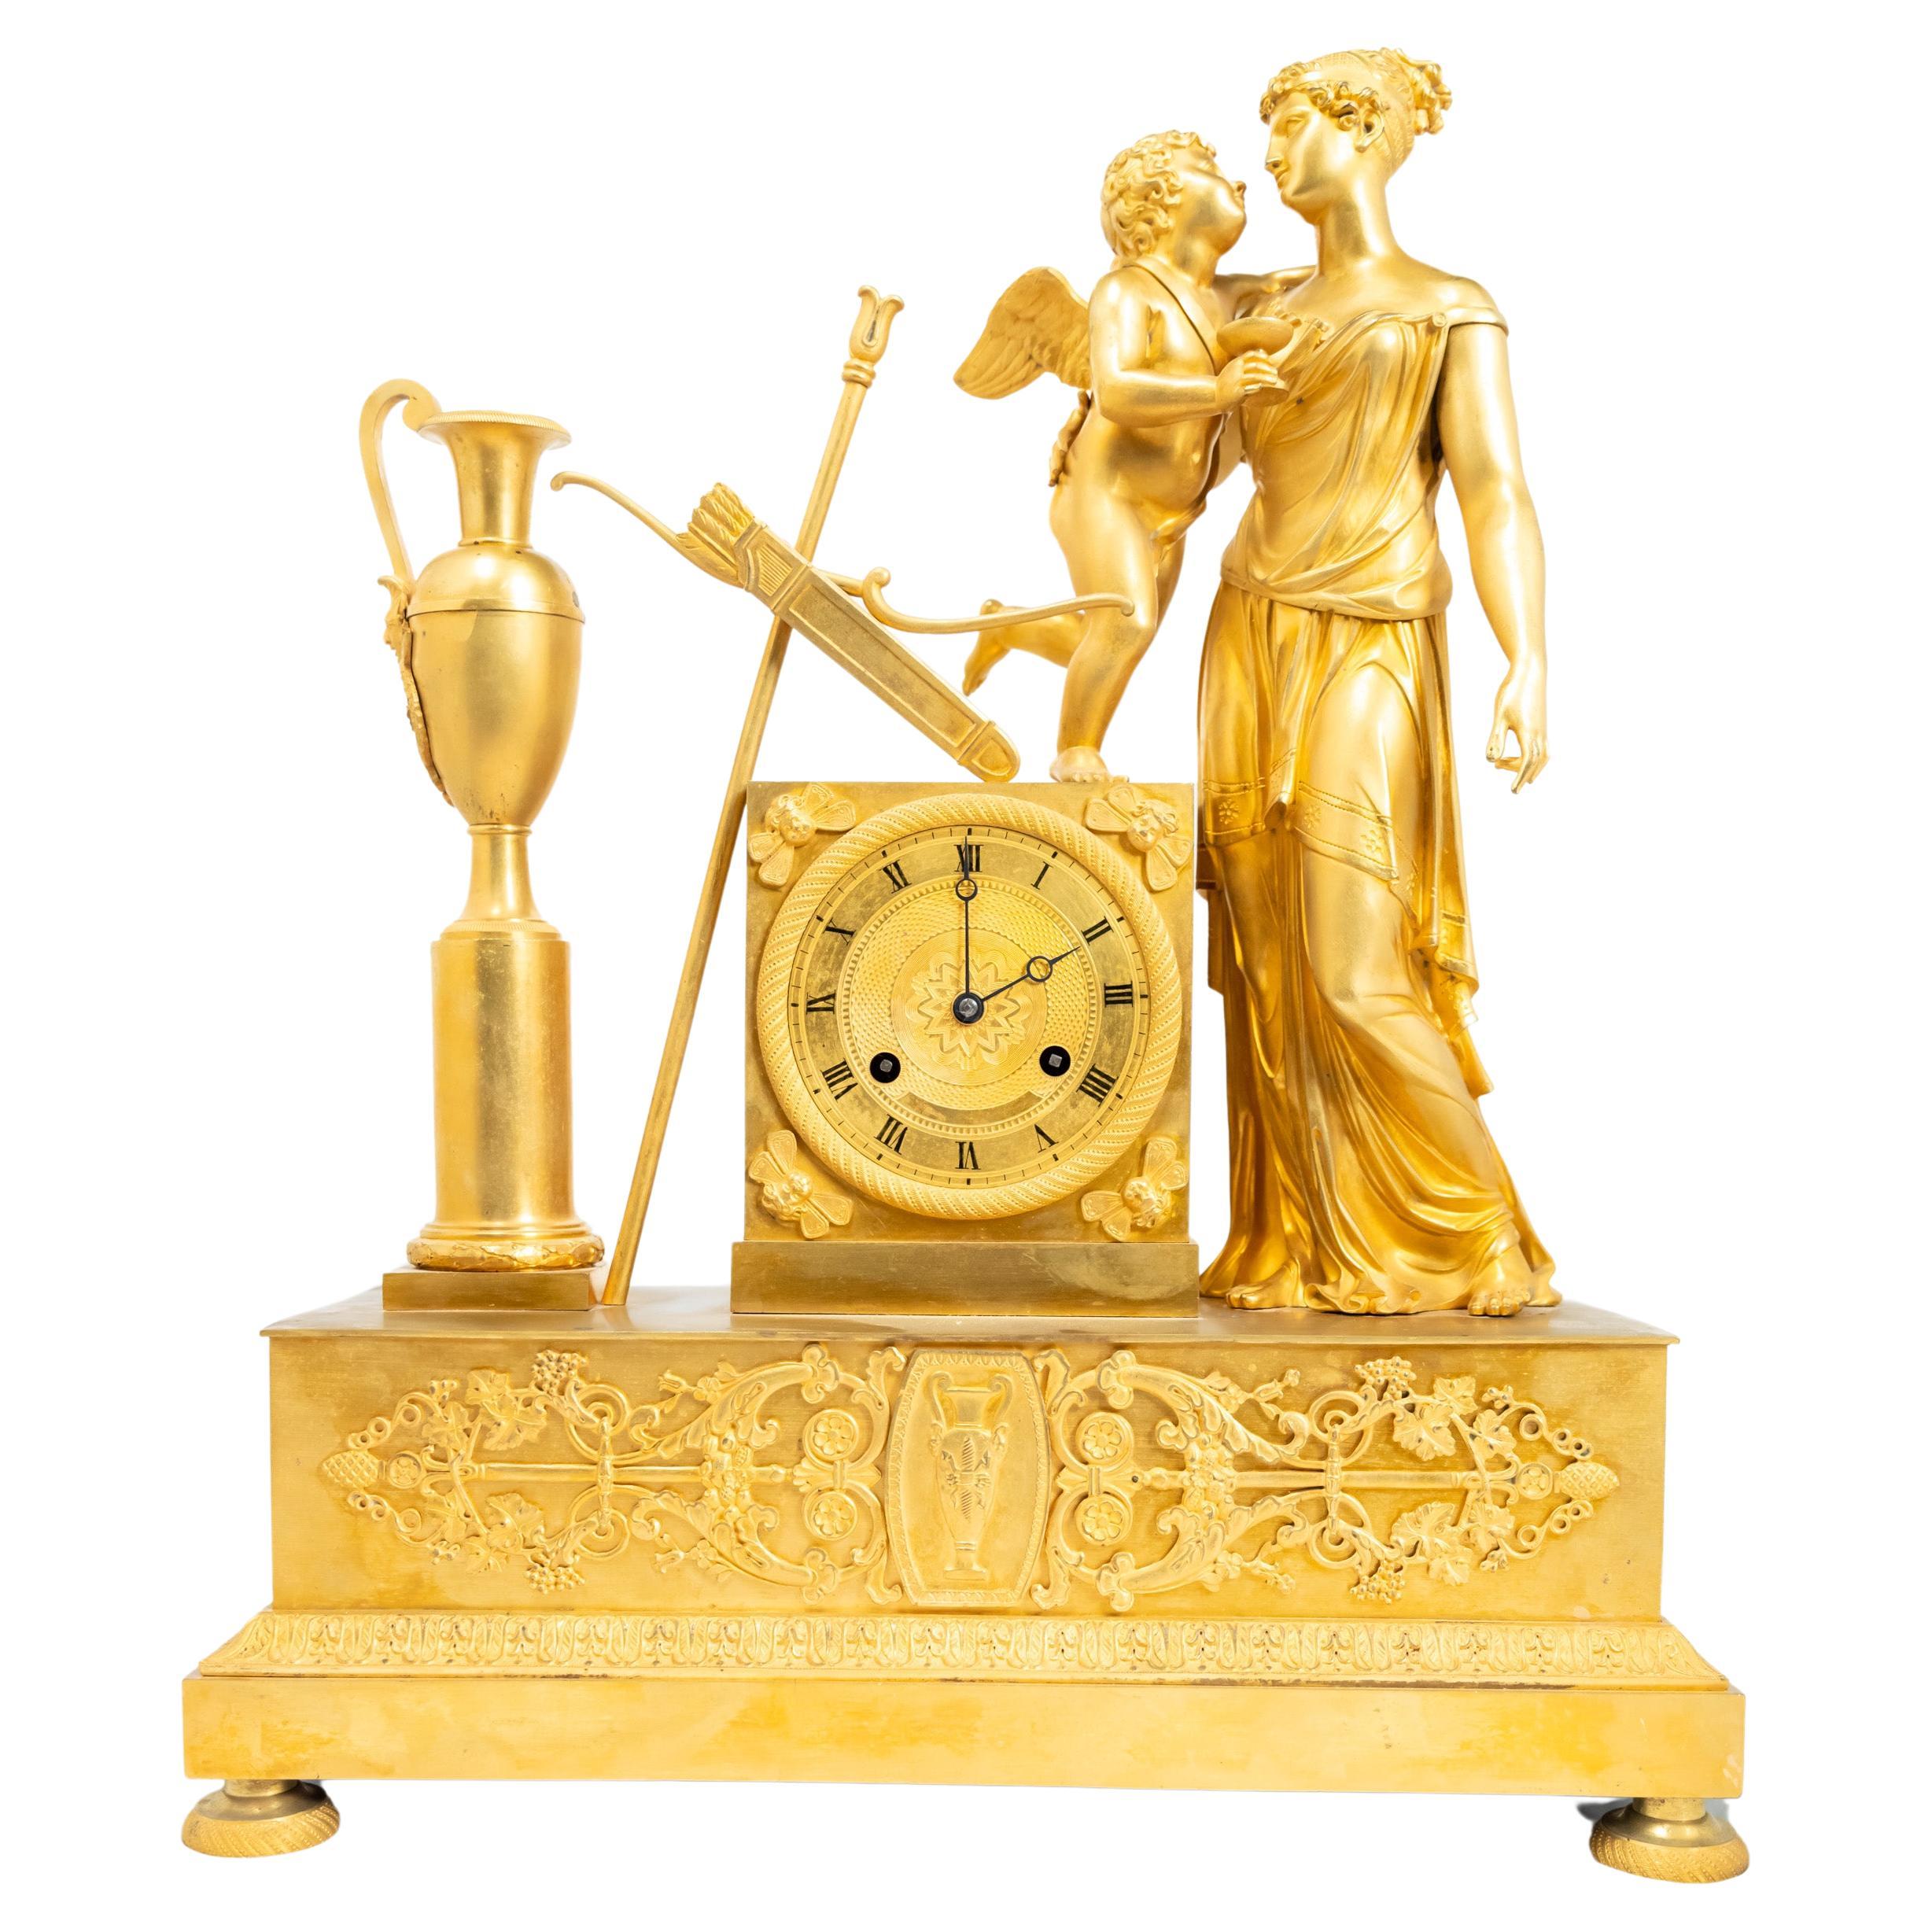 A Restauration Era Fire-Gilt Mantle Clock with Figures of Venus and Cupid For Sale